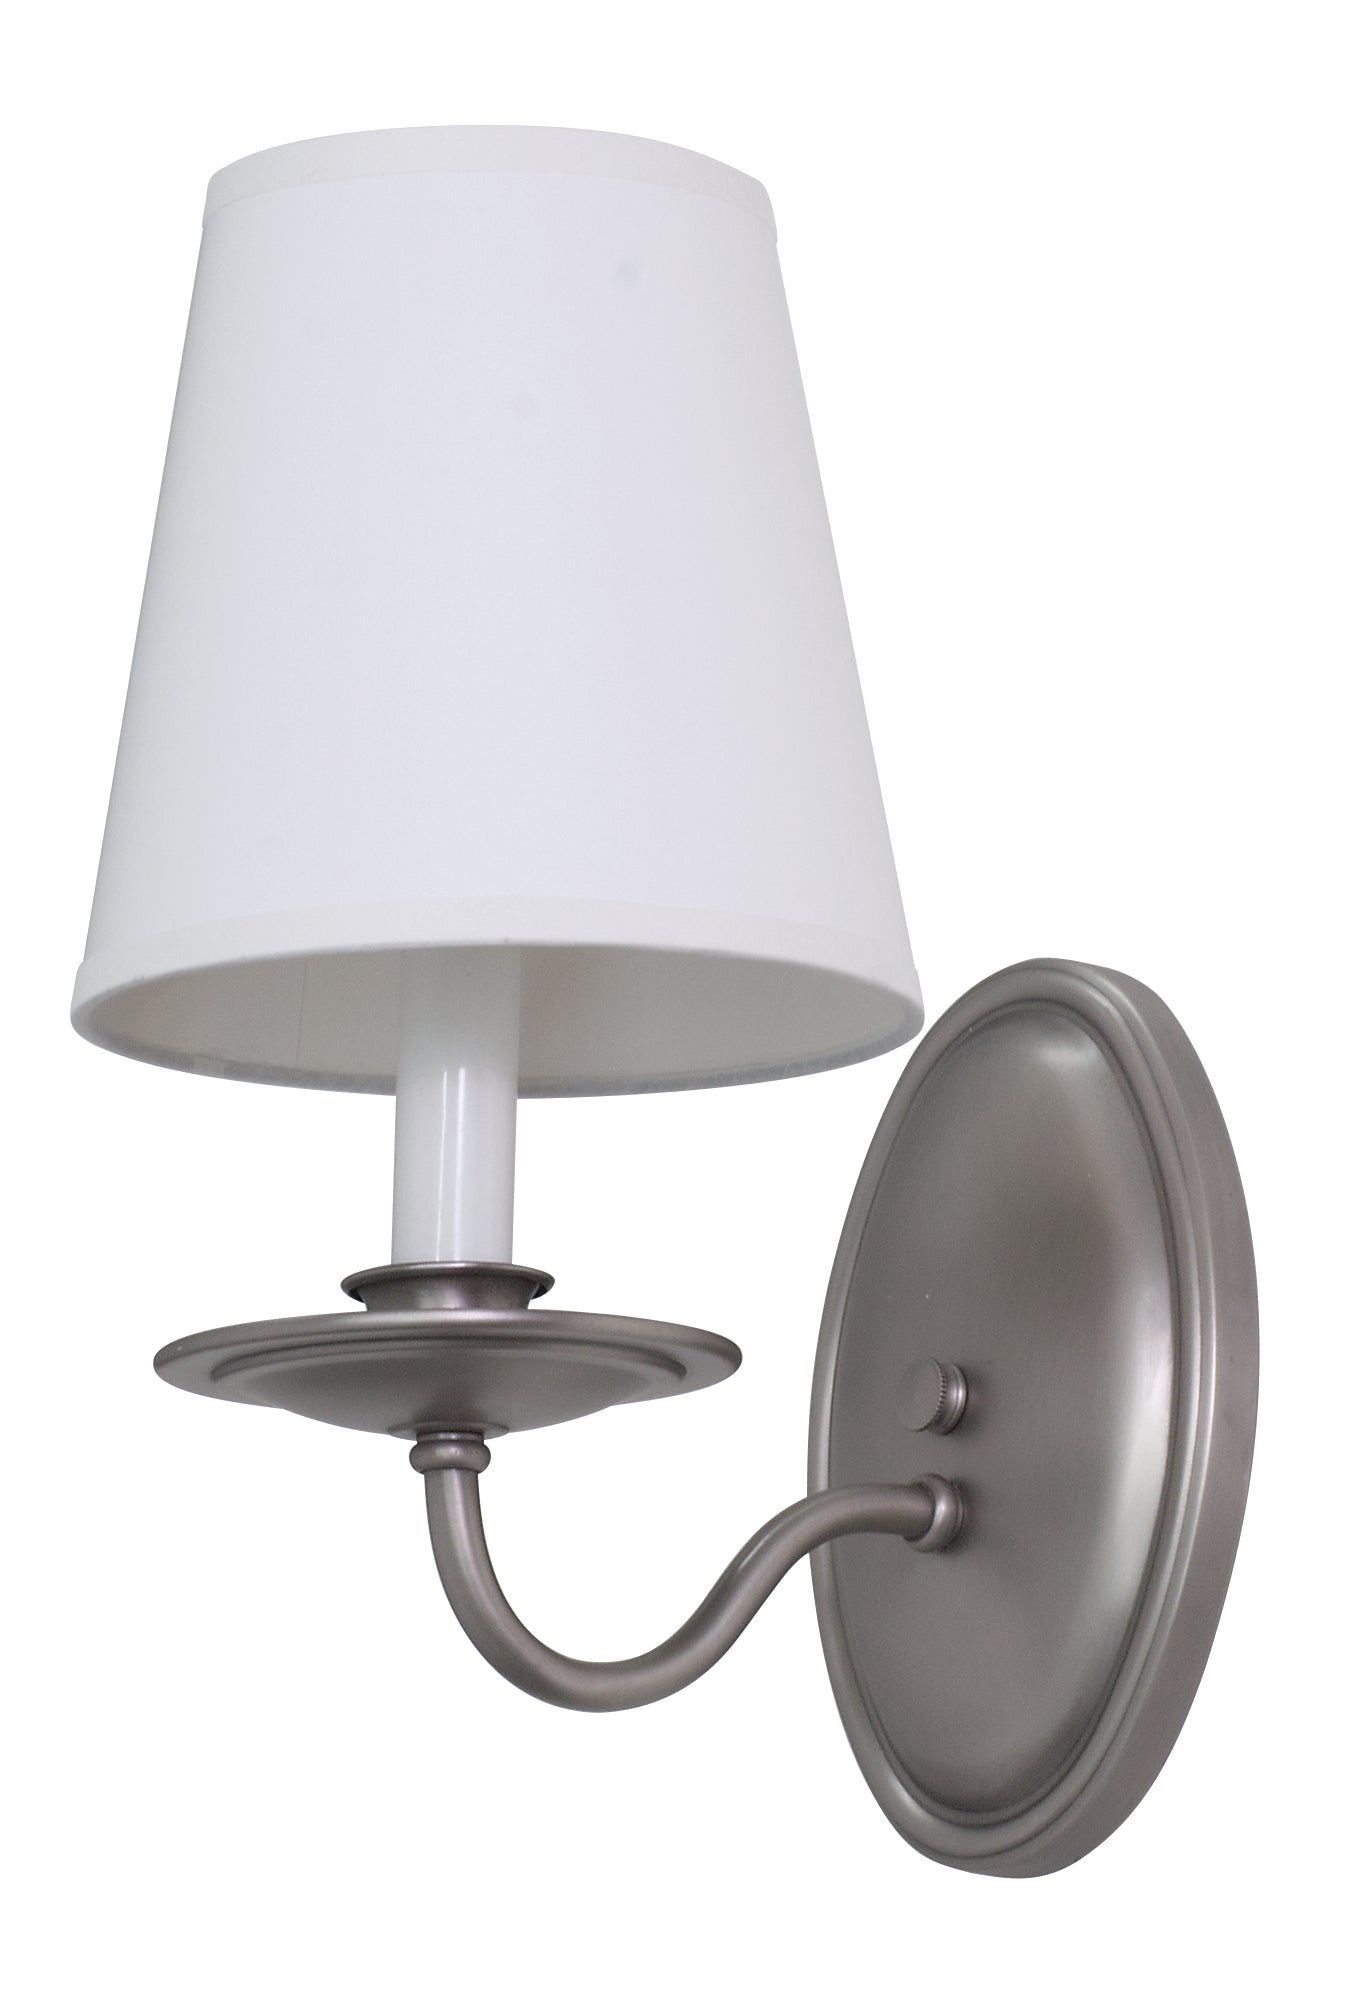 House of Troy Lake Shore Wall Sconce Satin Pewter LS217-SP